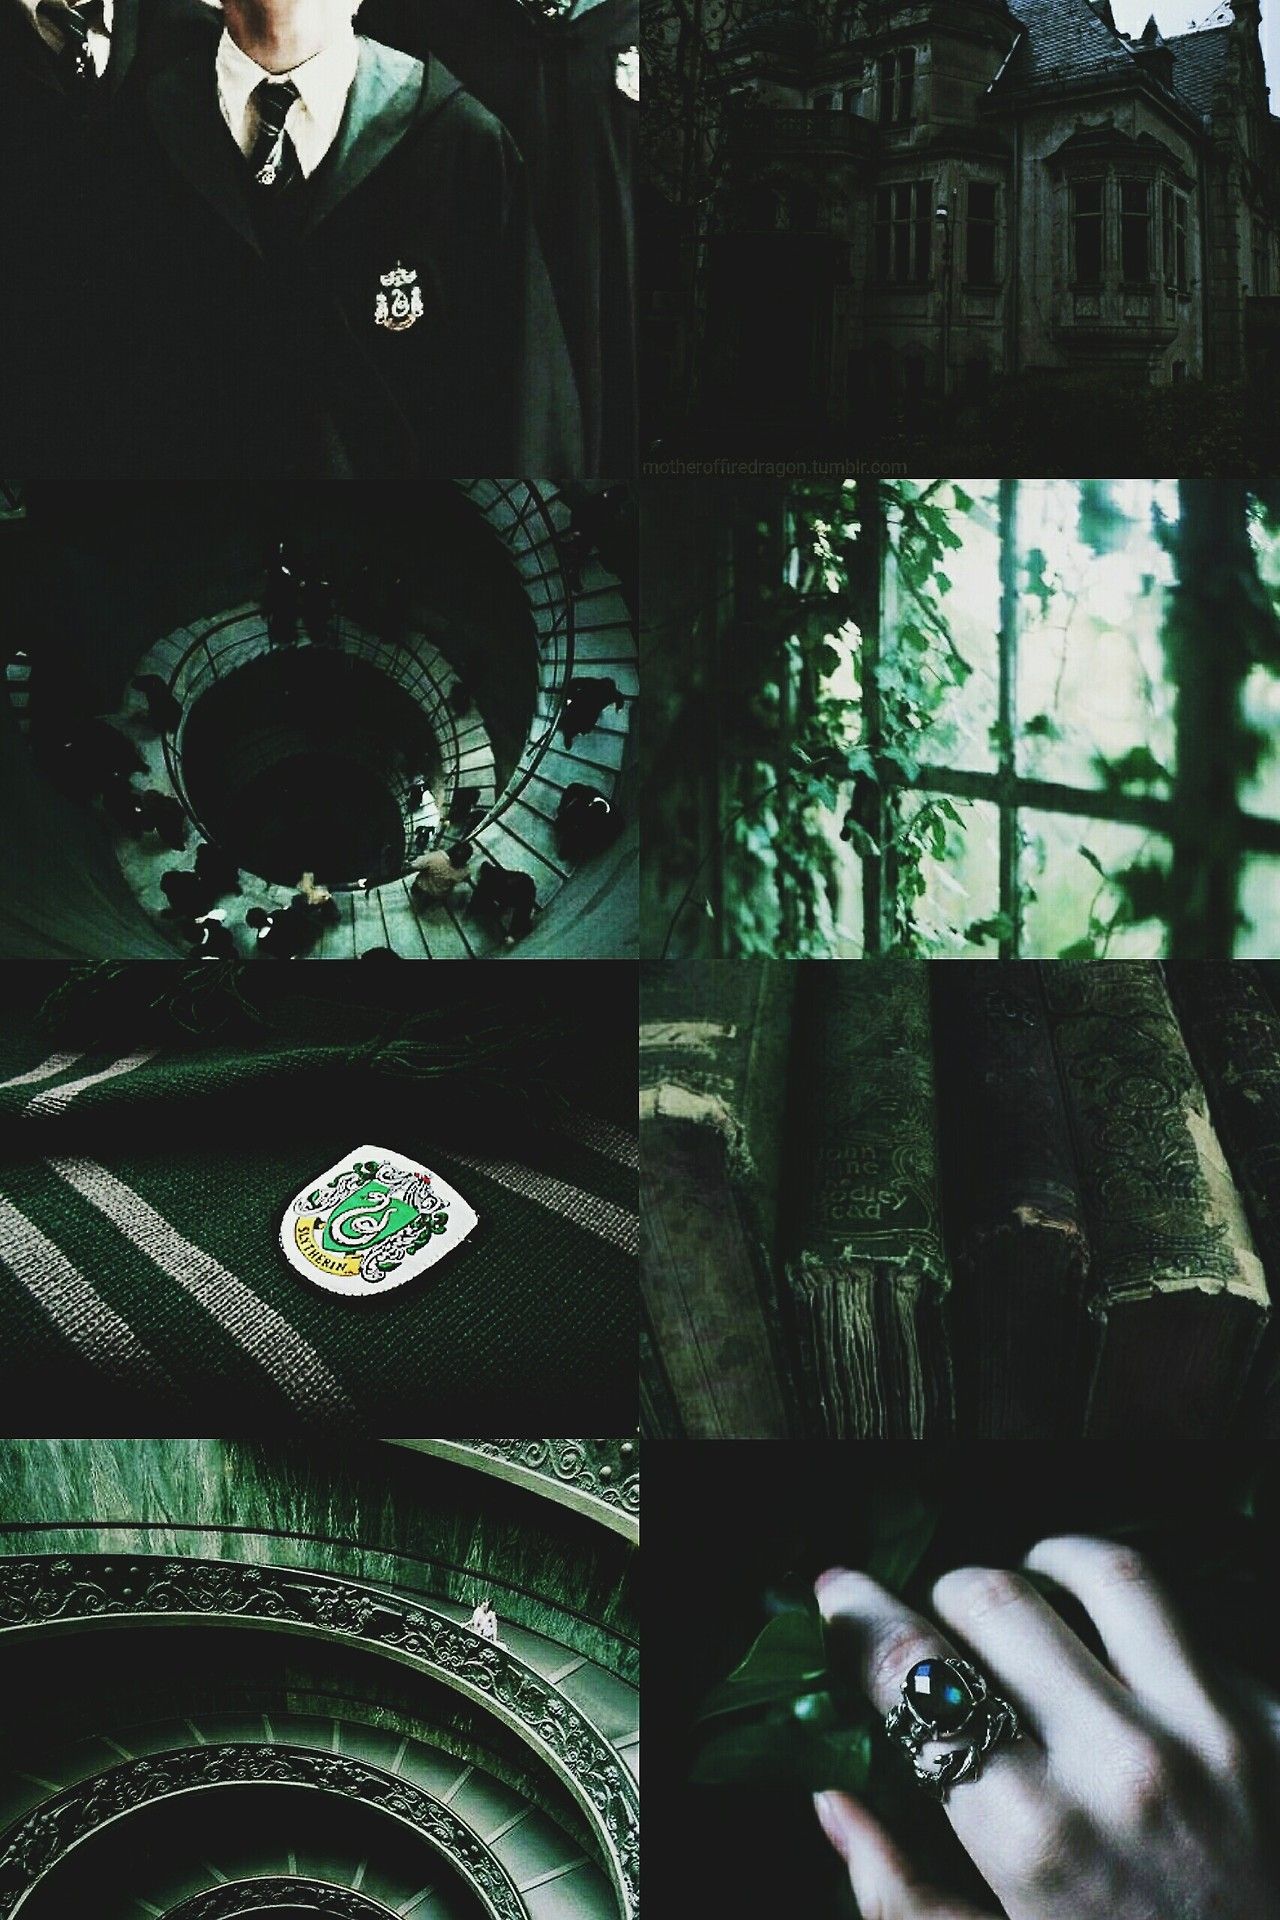 Slytherin Aesthetic Wallpaper Free Slytherin Aesthetic Background